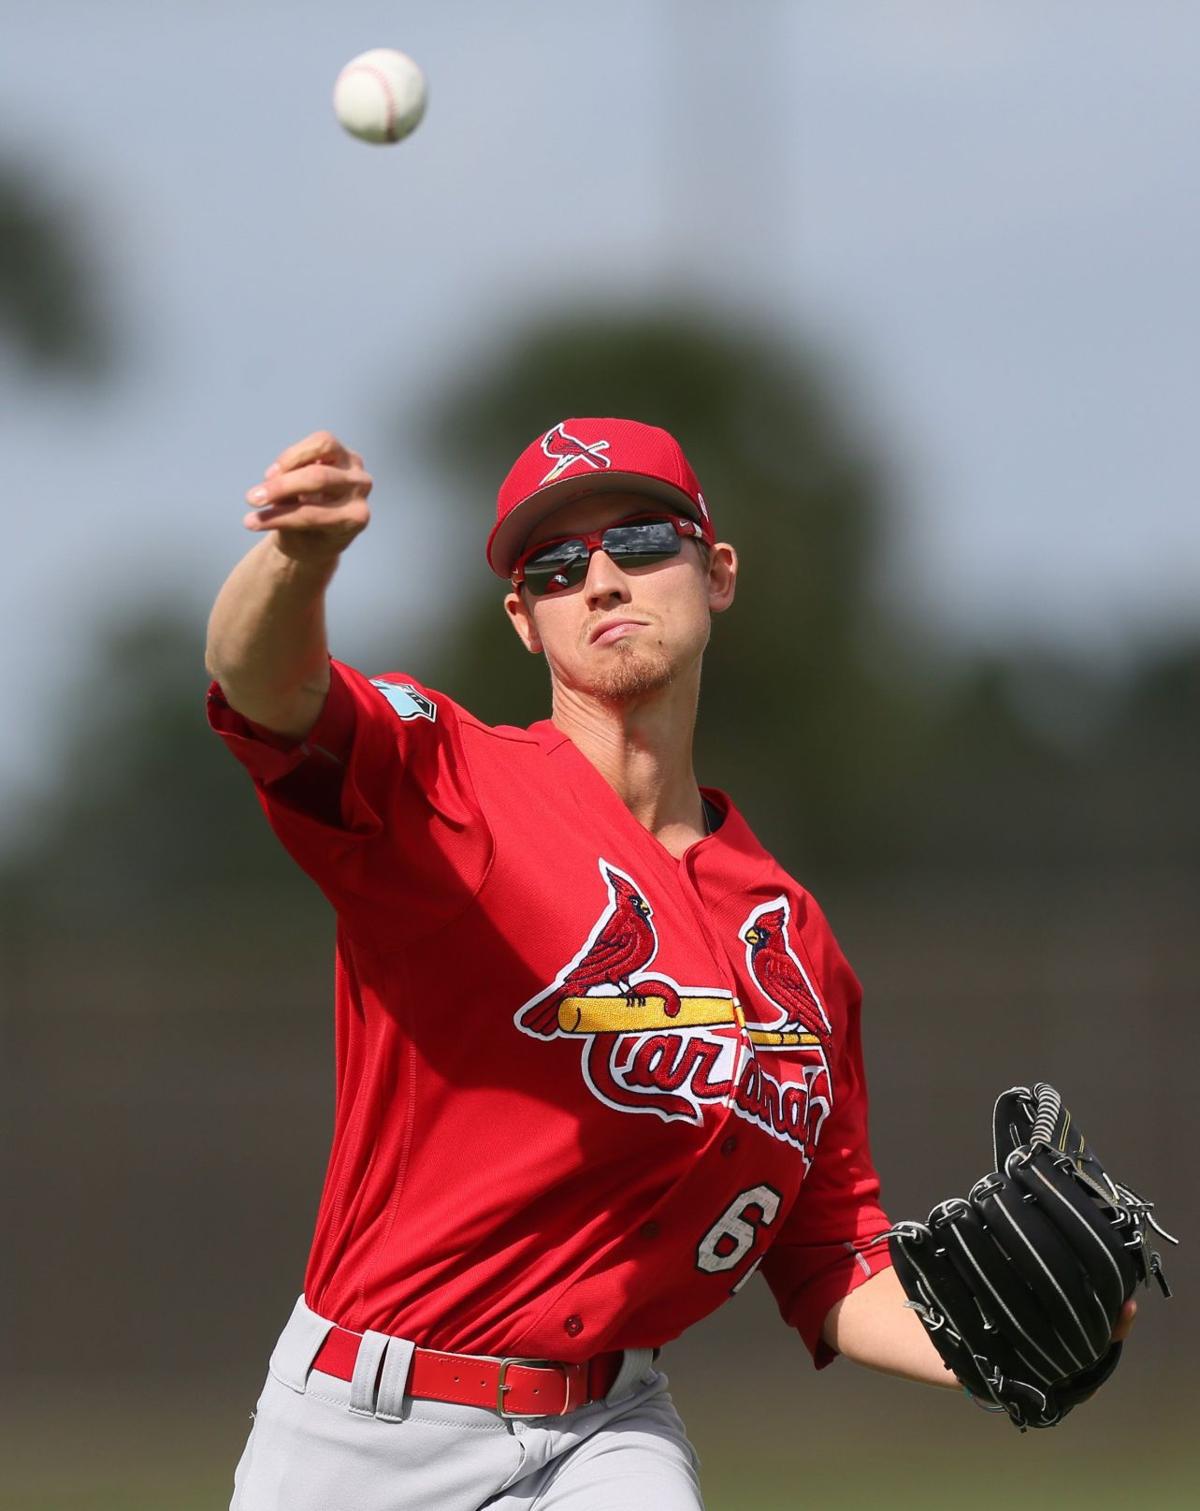 June 26 minor league report: Catching prospect hits two bombs for State College | Cardinal Beat ...